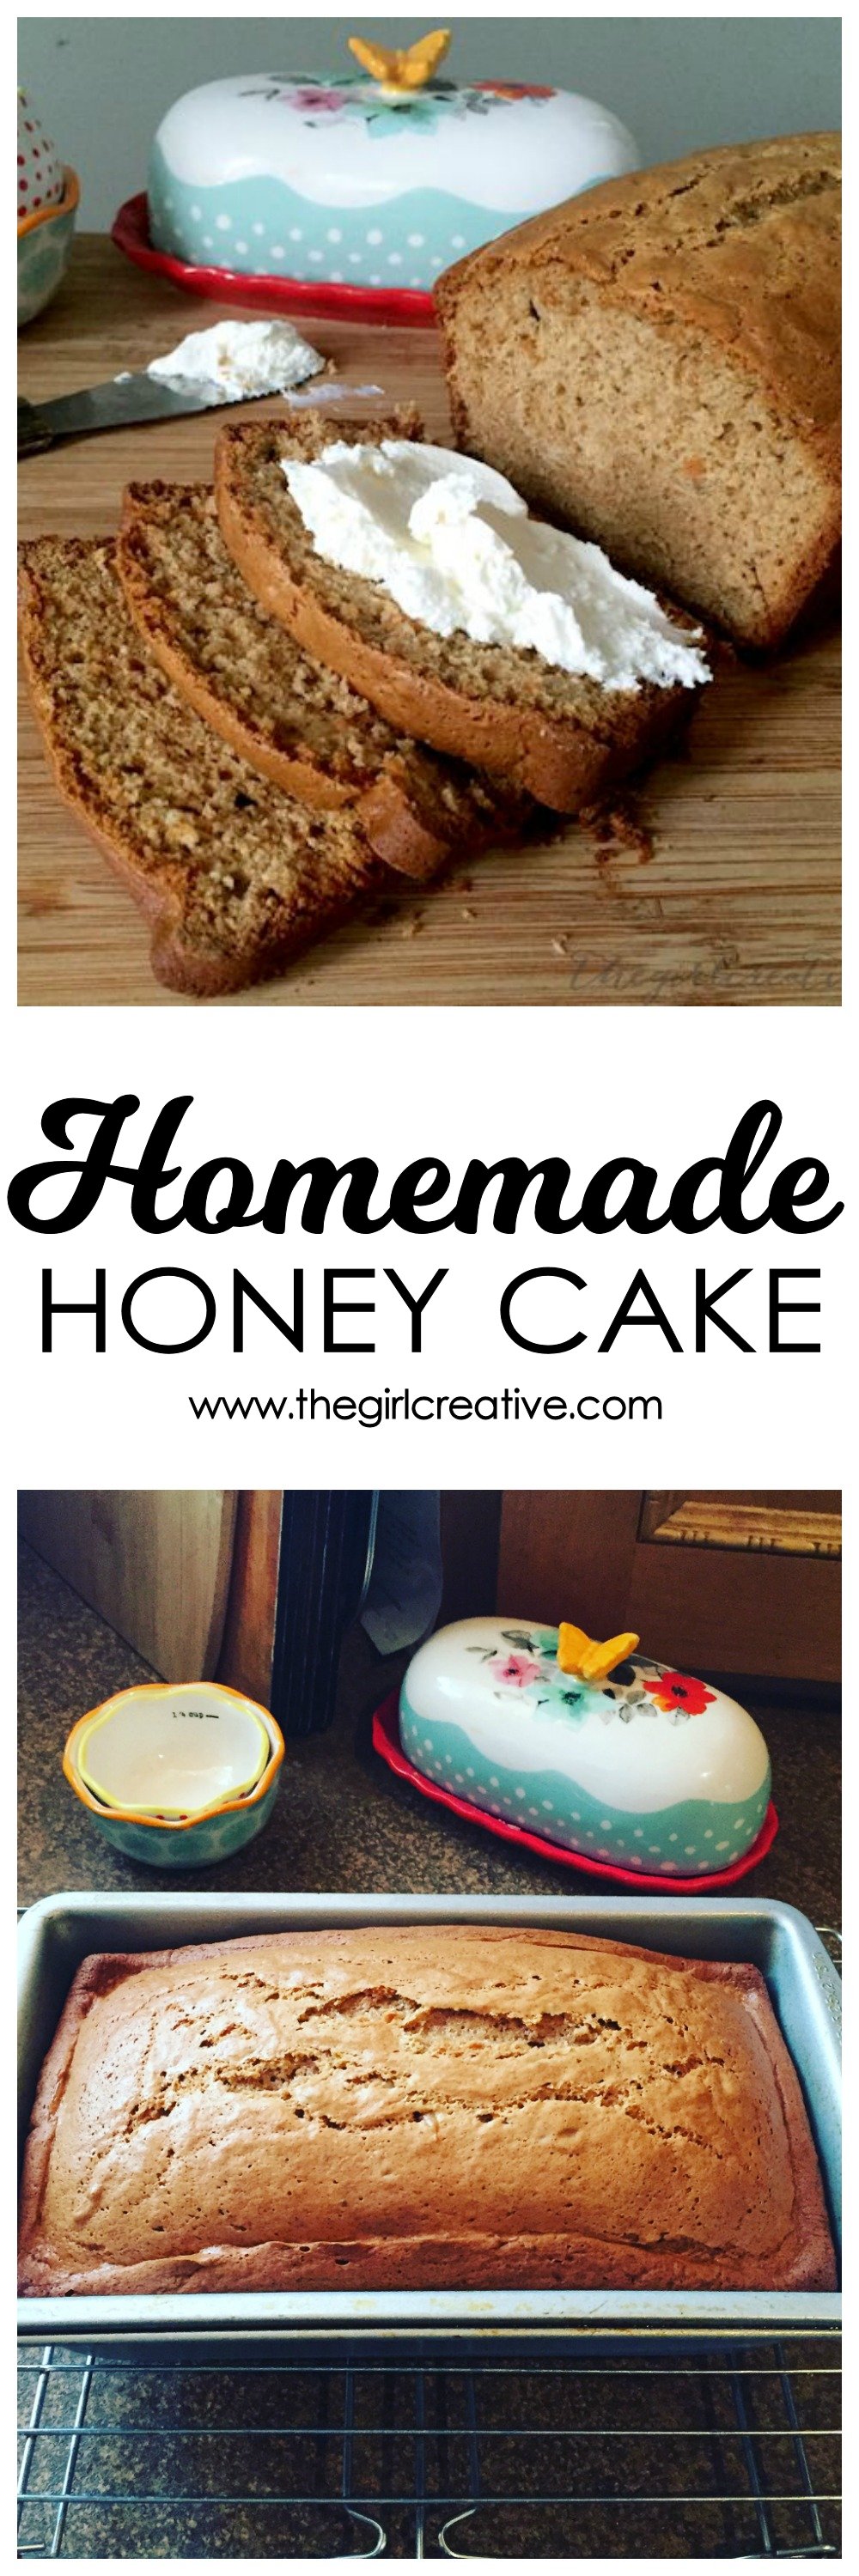 This delicious honey cake is perfect with whipped cream cheese on top. It's so good you won't be able to control yourself. Makes a wonderful breakfast or dessert food.